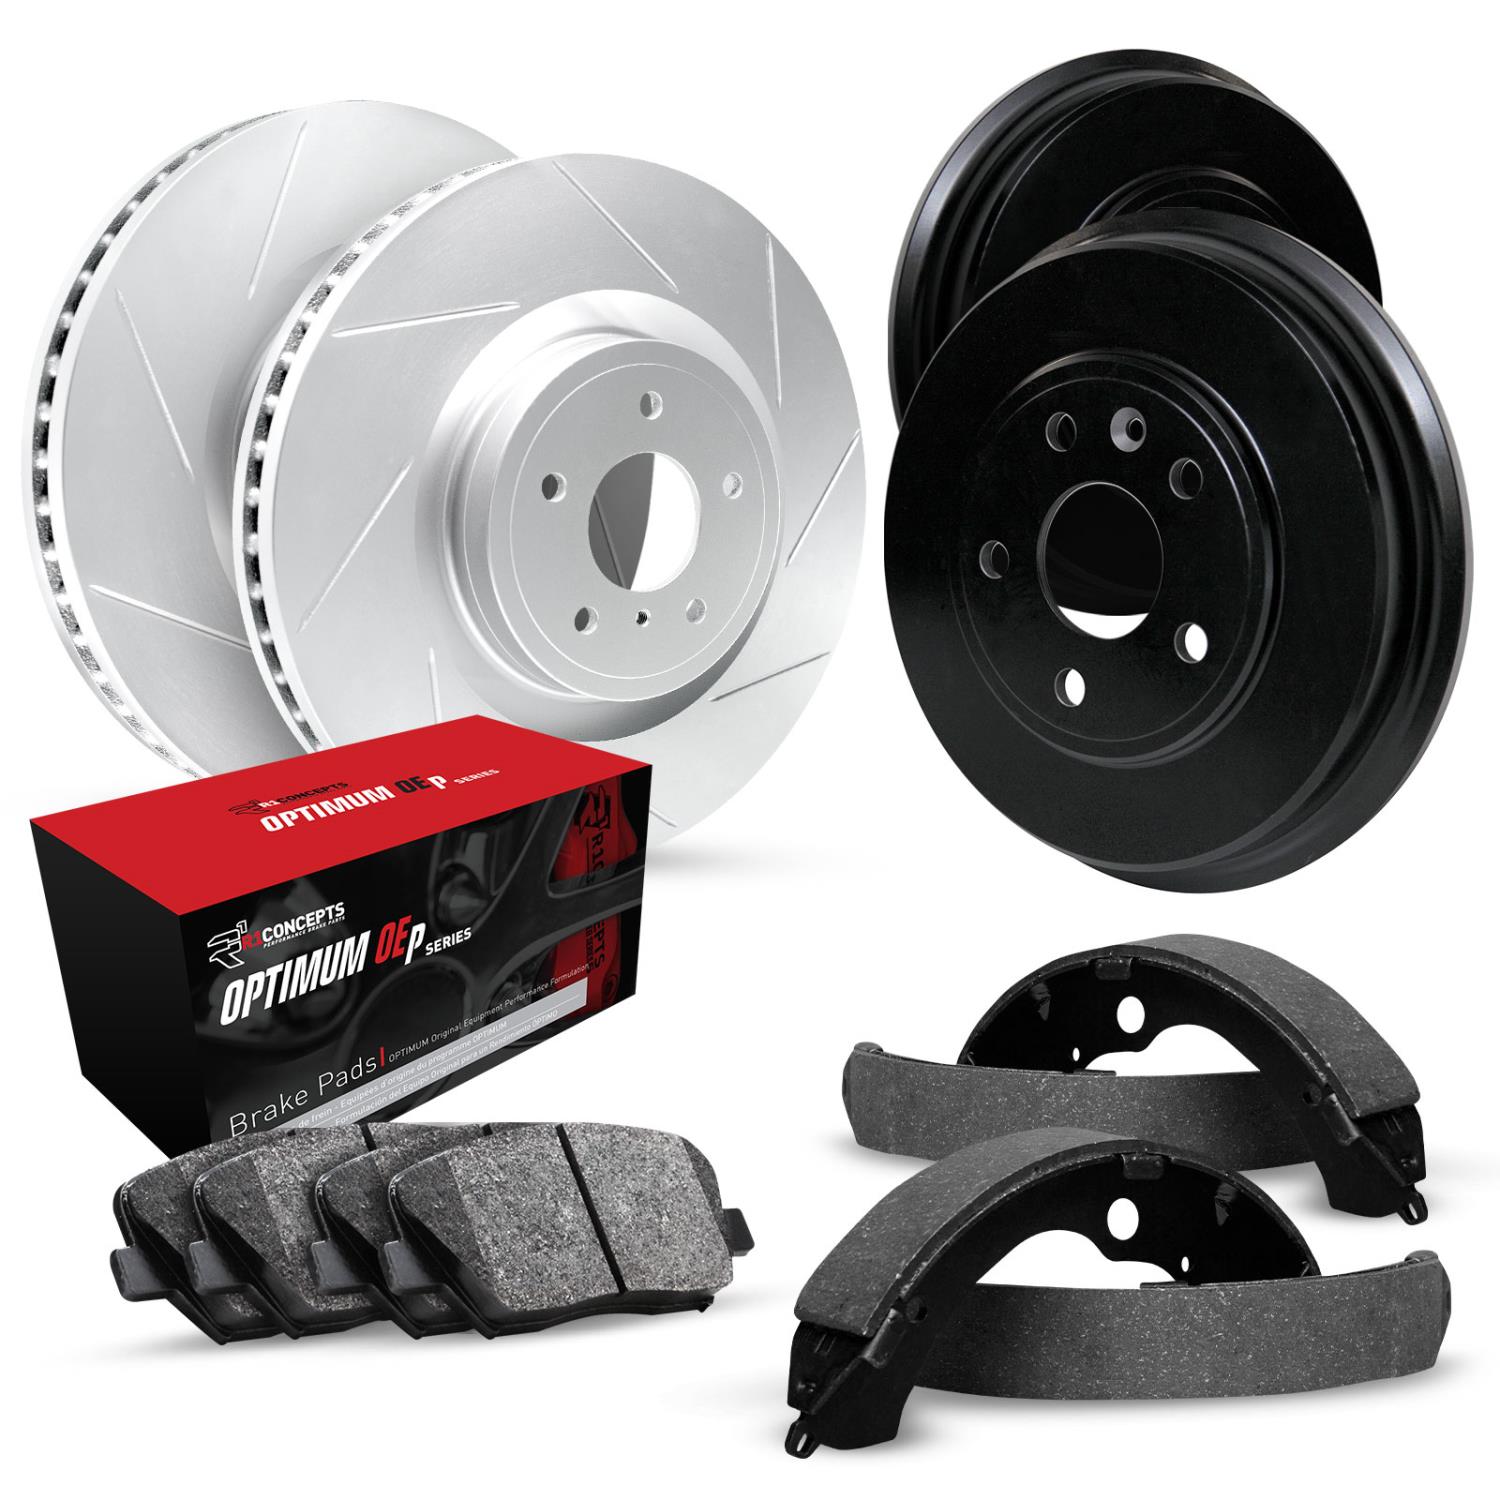 GEO-Carbon Slotted Brake Rotor & Drum Set w/Optimum OE Pads & Shoes, 1995-1999 Ford/Lincoln/Mercury/Mazda